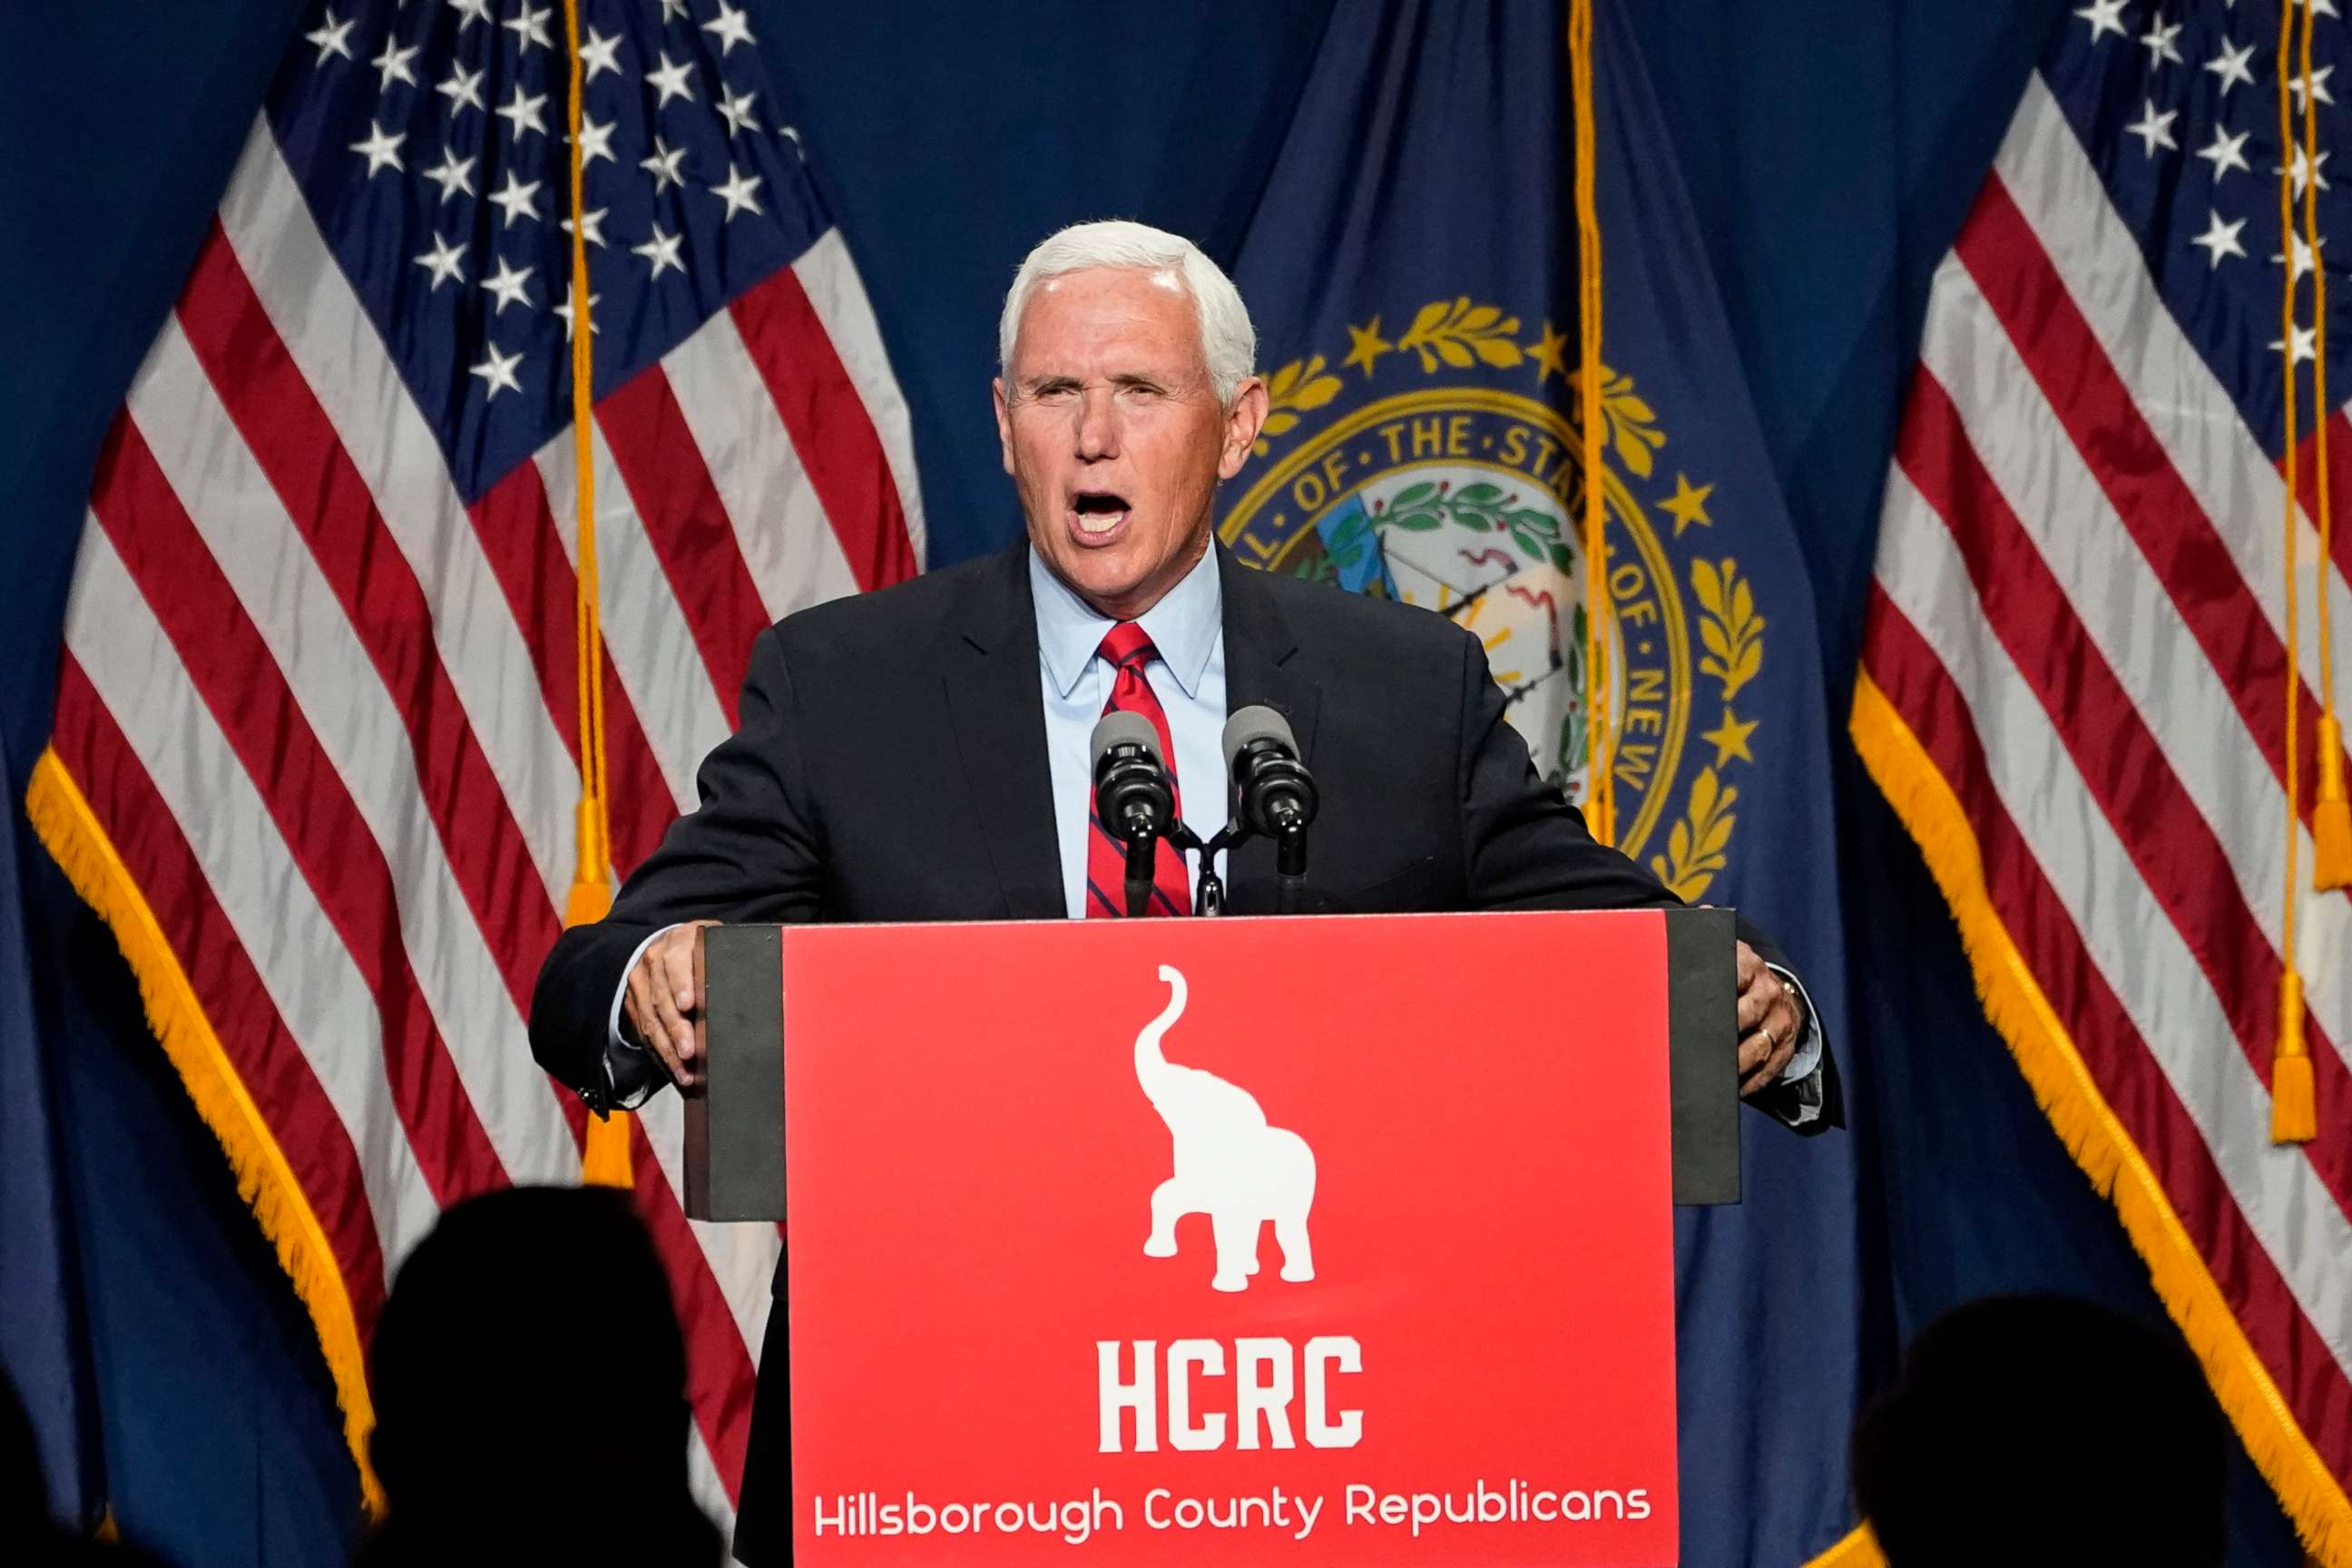 PHOTO: Former Vice President Mike Pence speaks at the annual Hillsborough County NH GOP Lincoln-Reagan Dinner, Thursday, June 3, 2021, in Manchester, N.H.